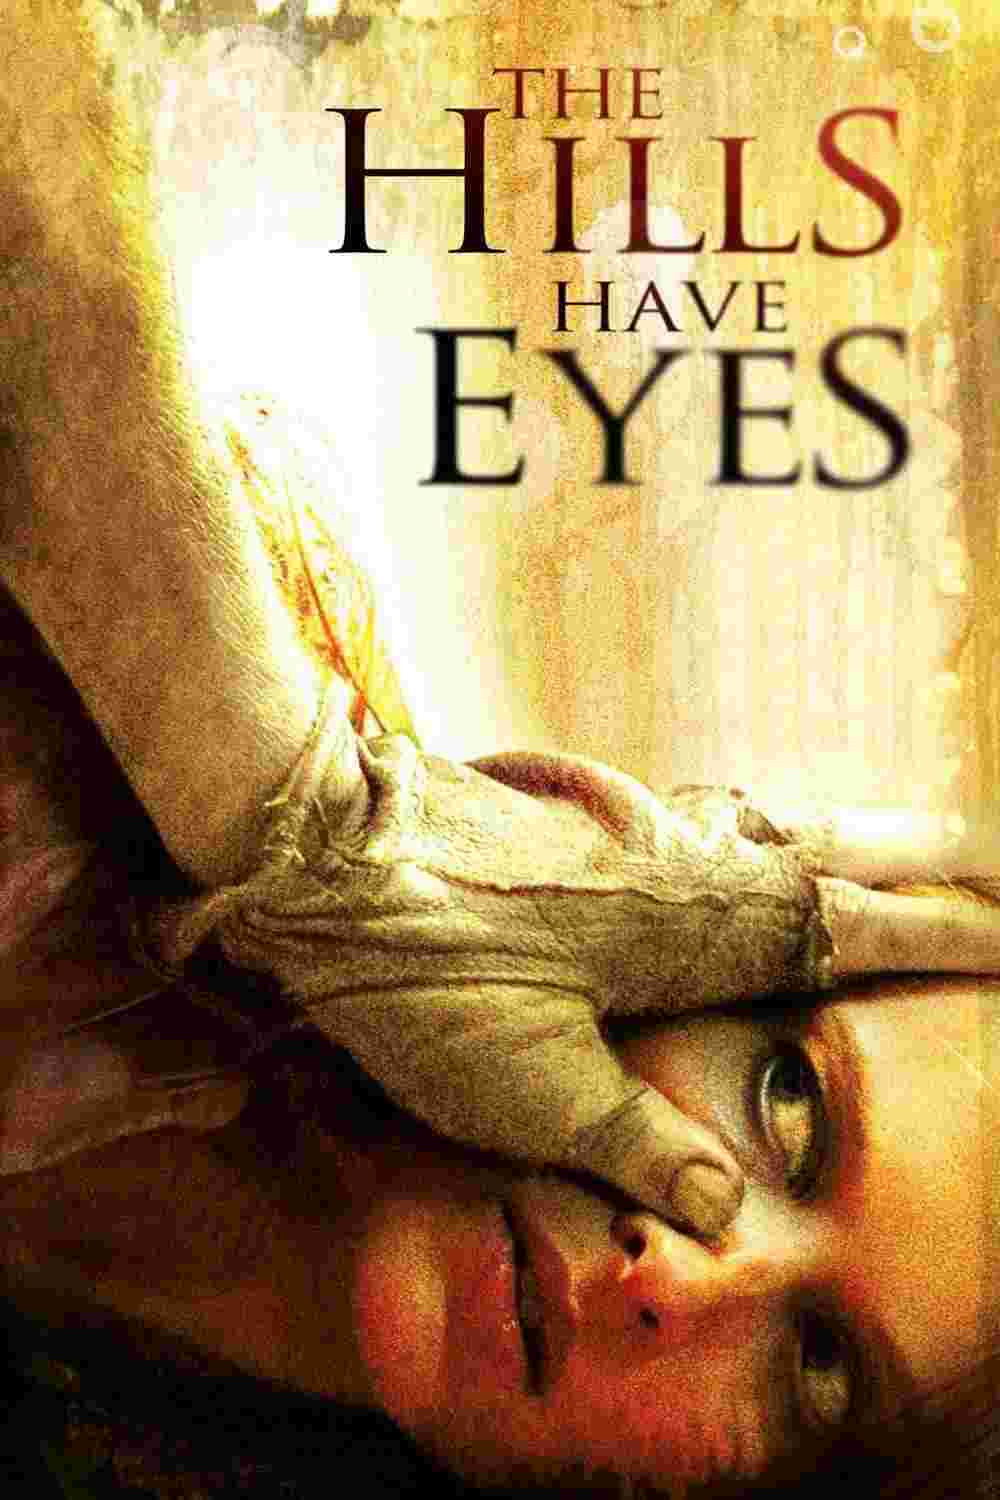 The Hills Have Eyes (2006) Ted Levine